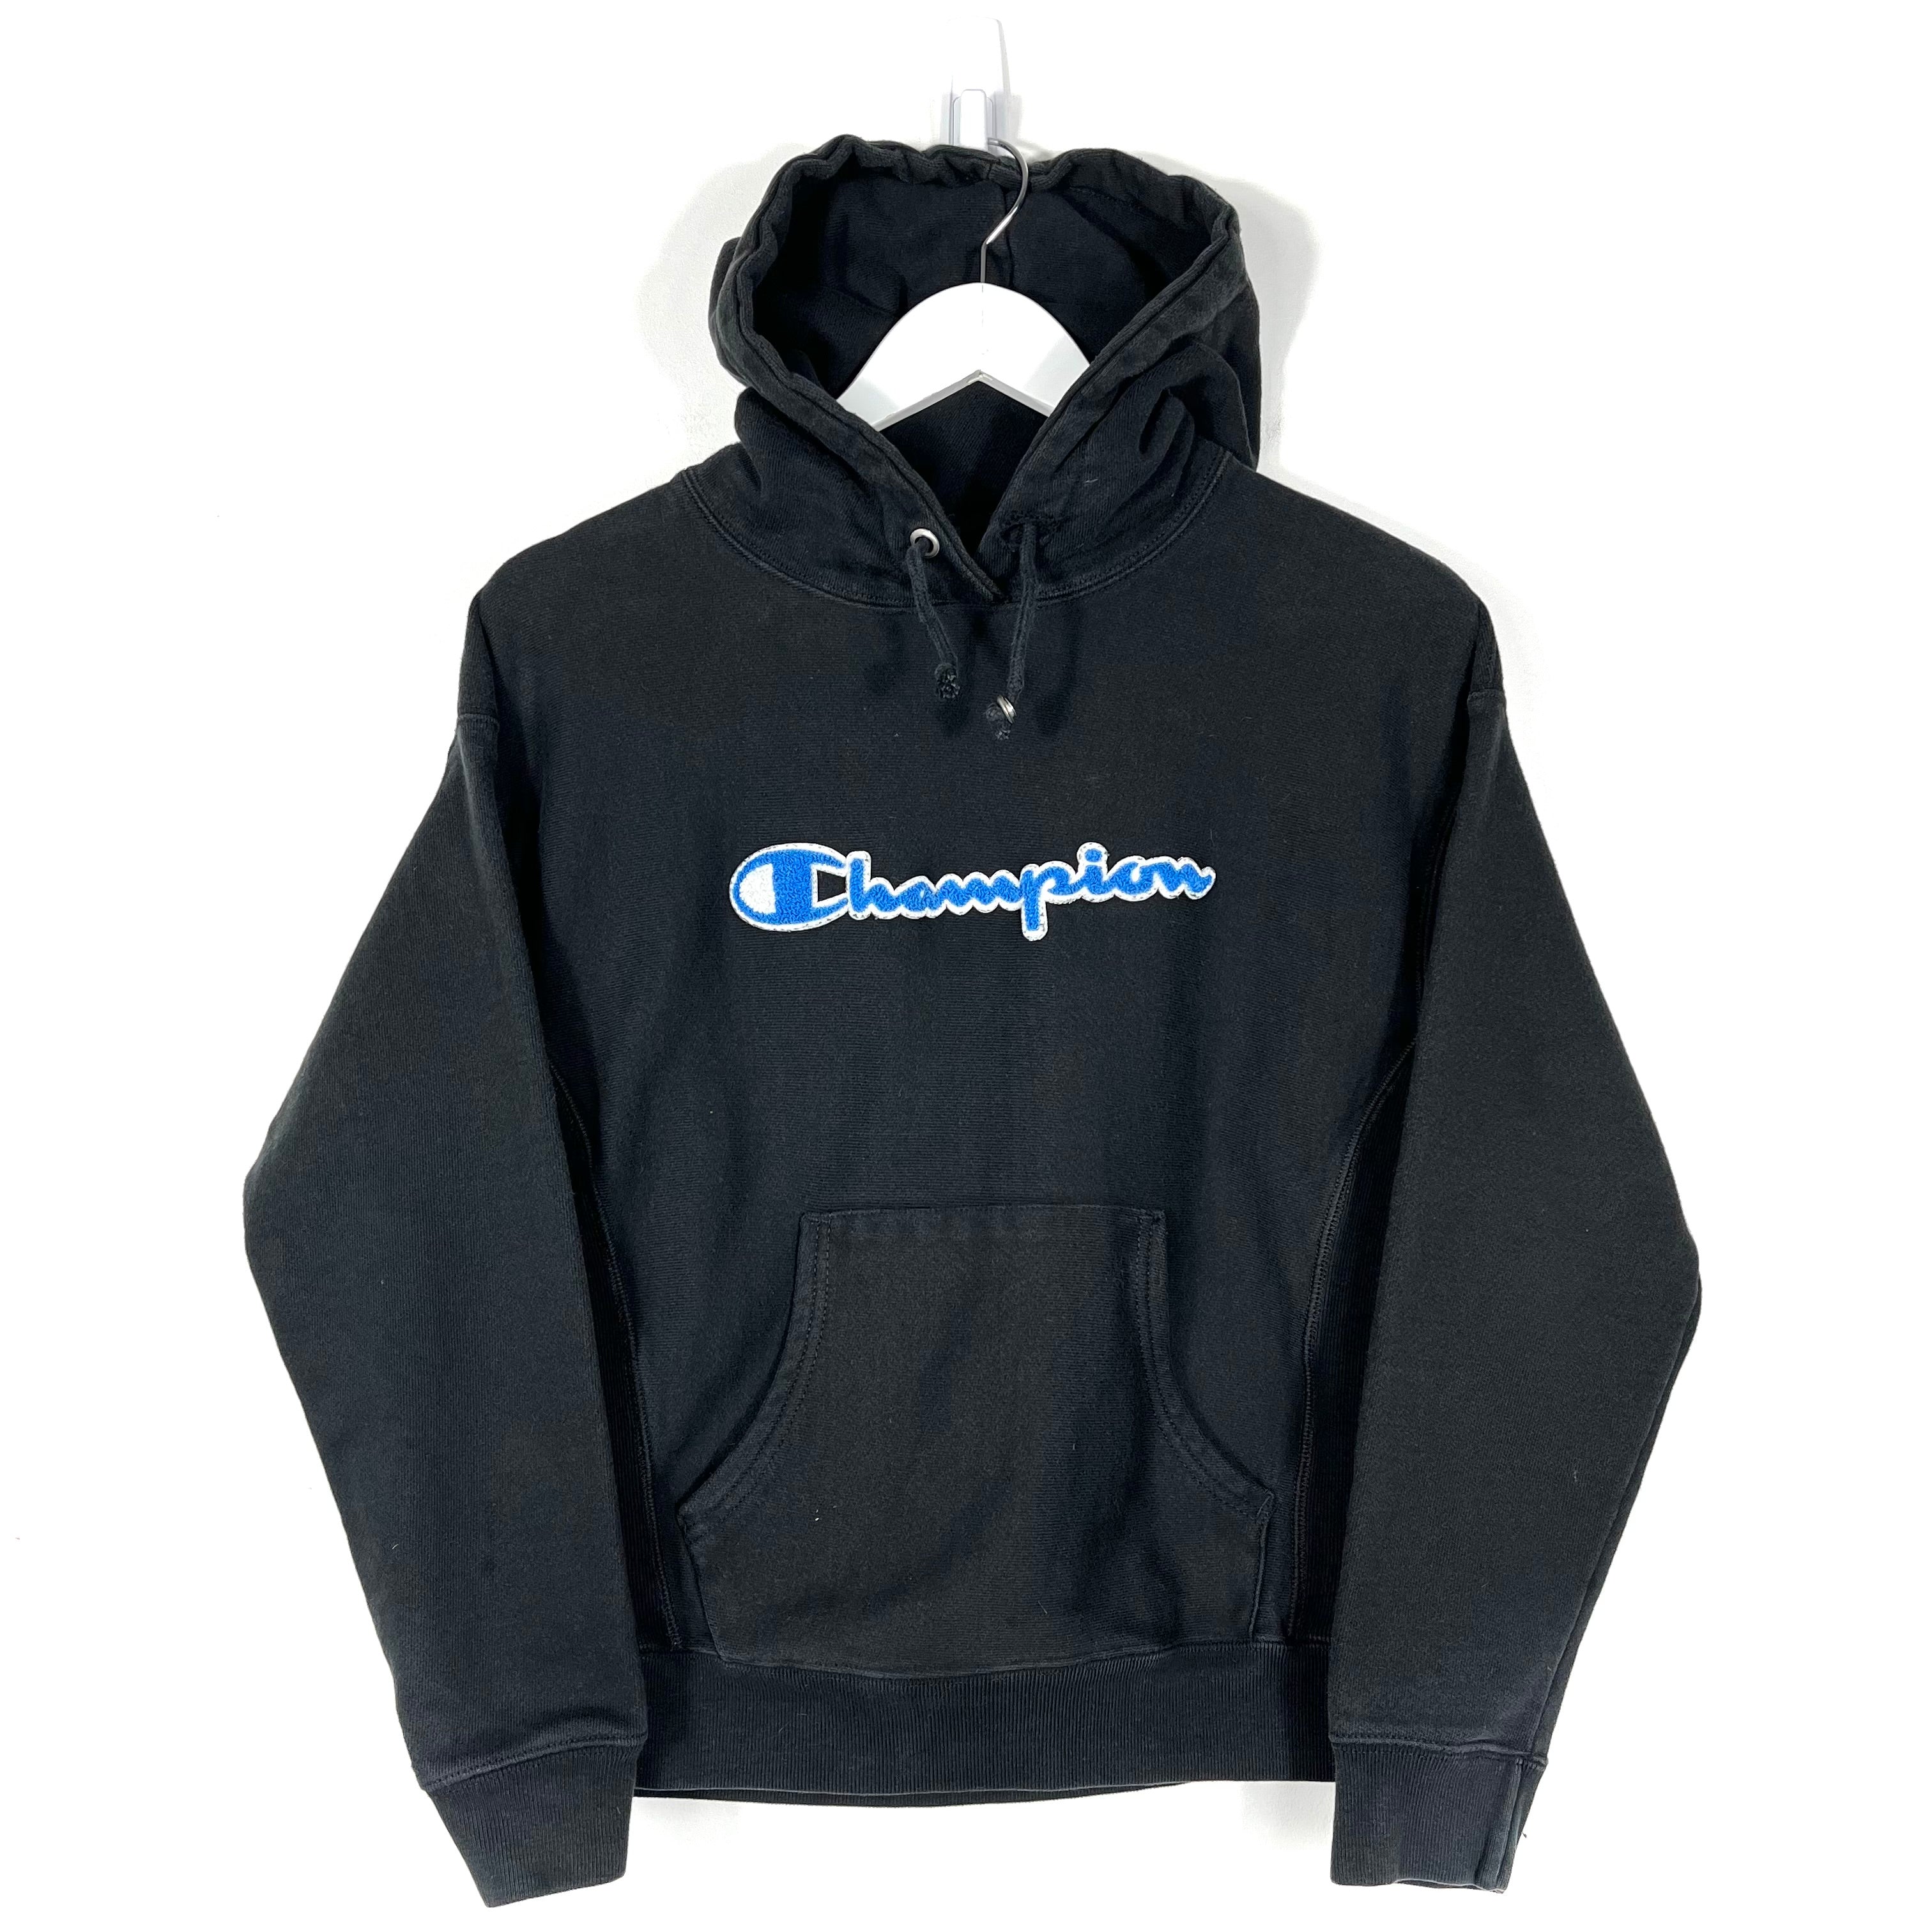 Vintage Champion Spell Out Reverse Weave Hoodie - Women's Small